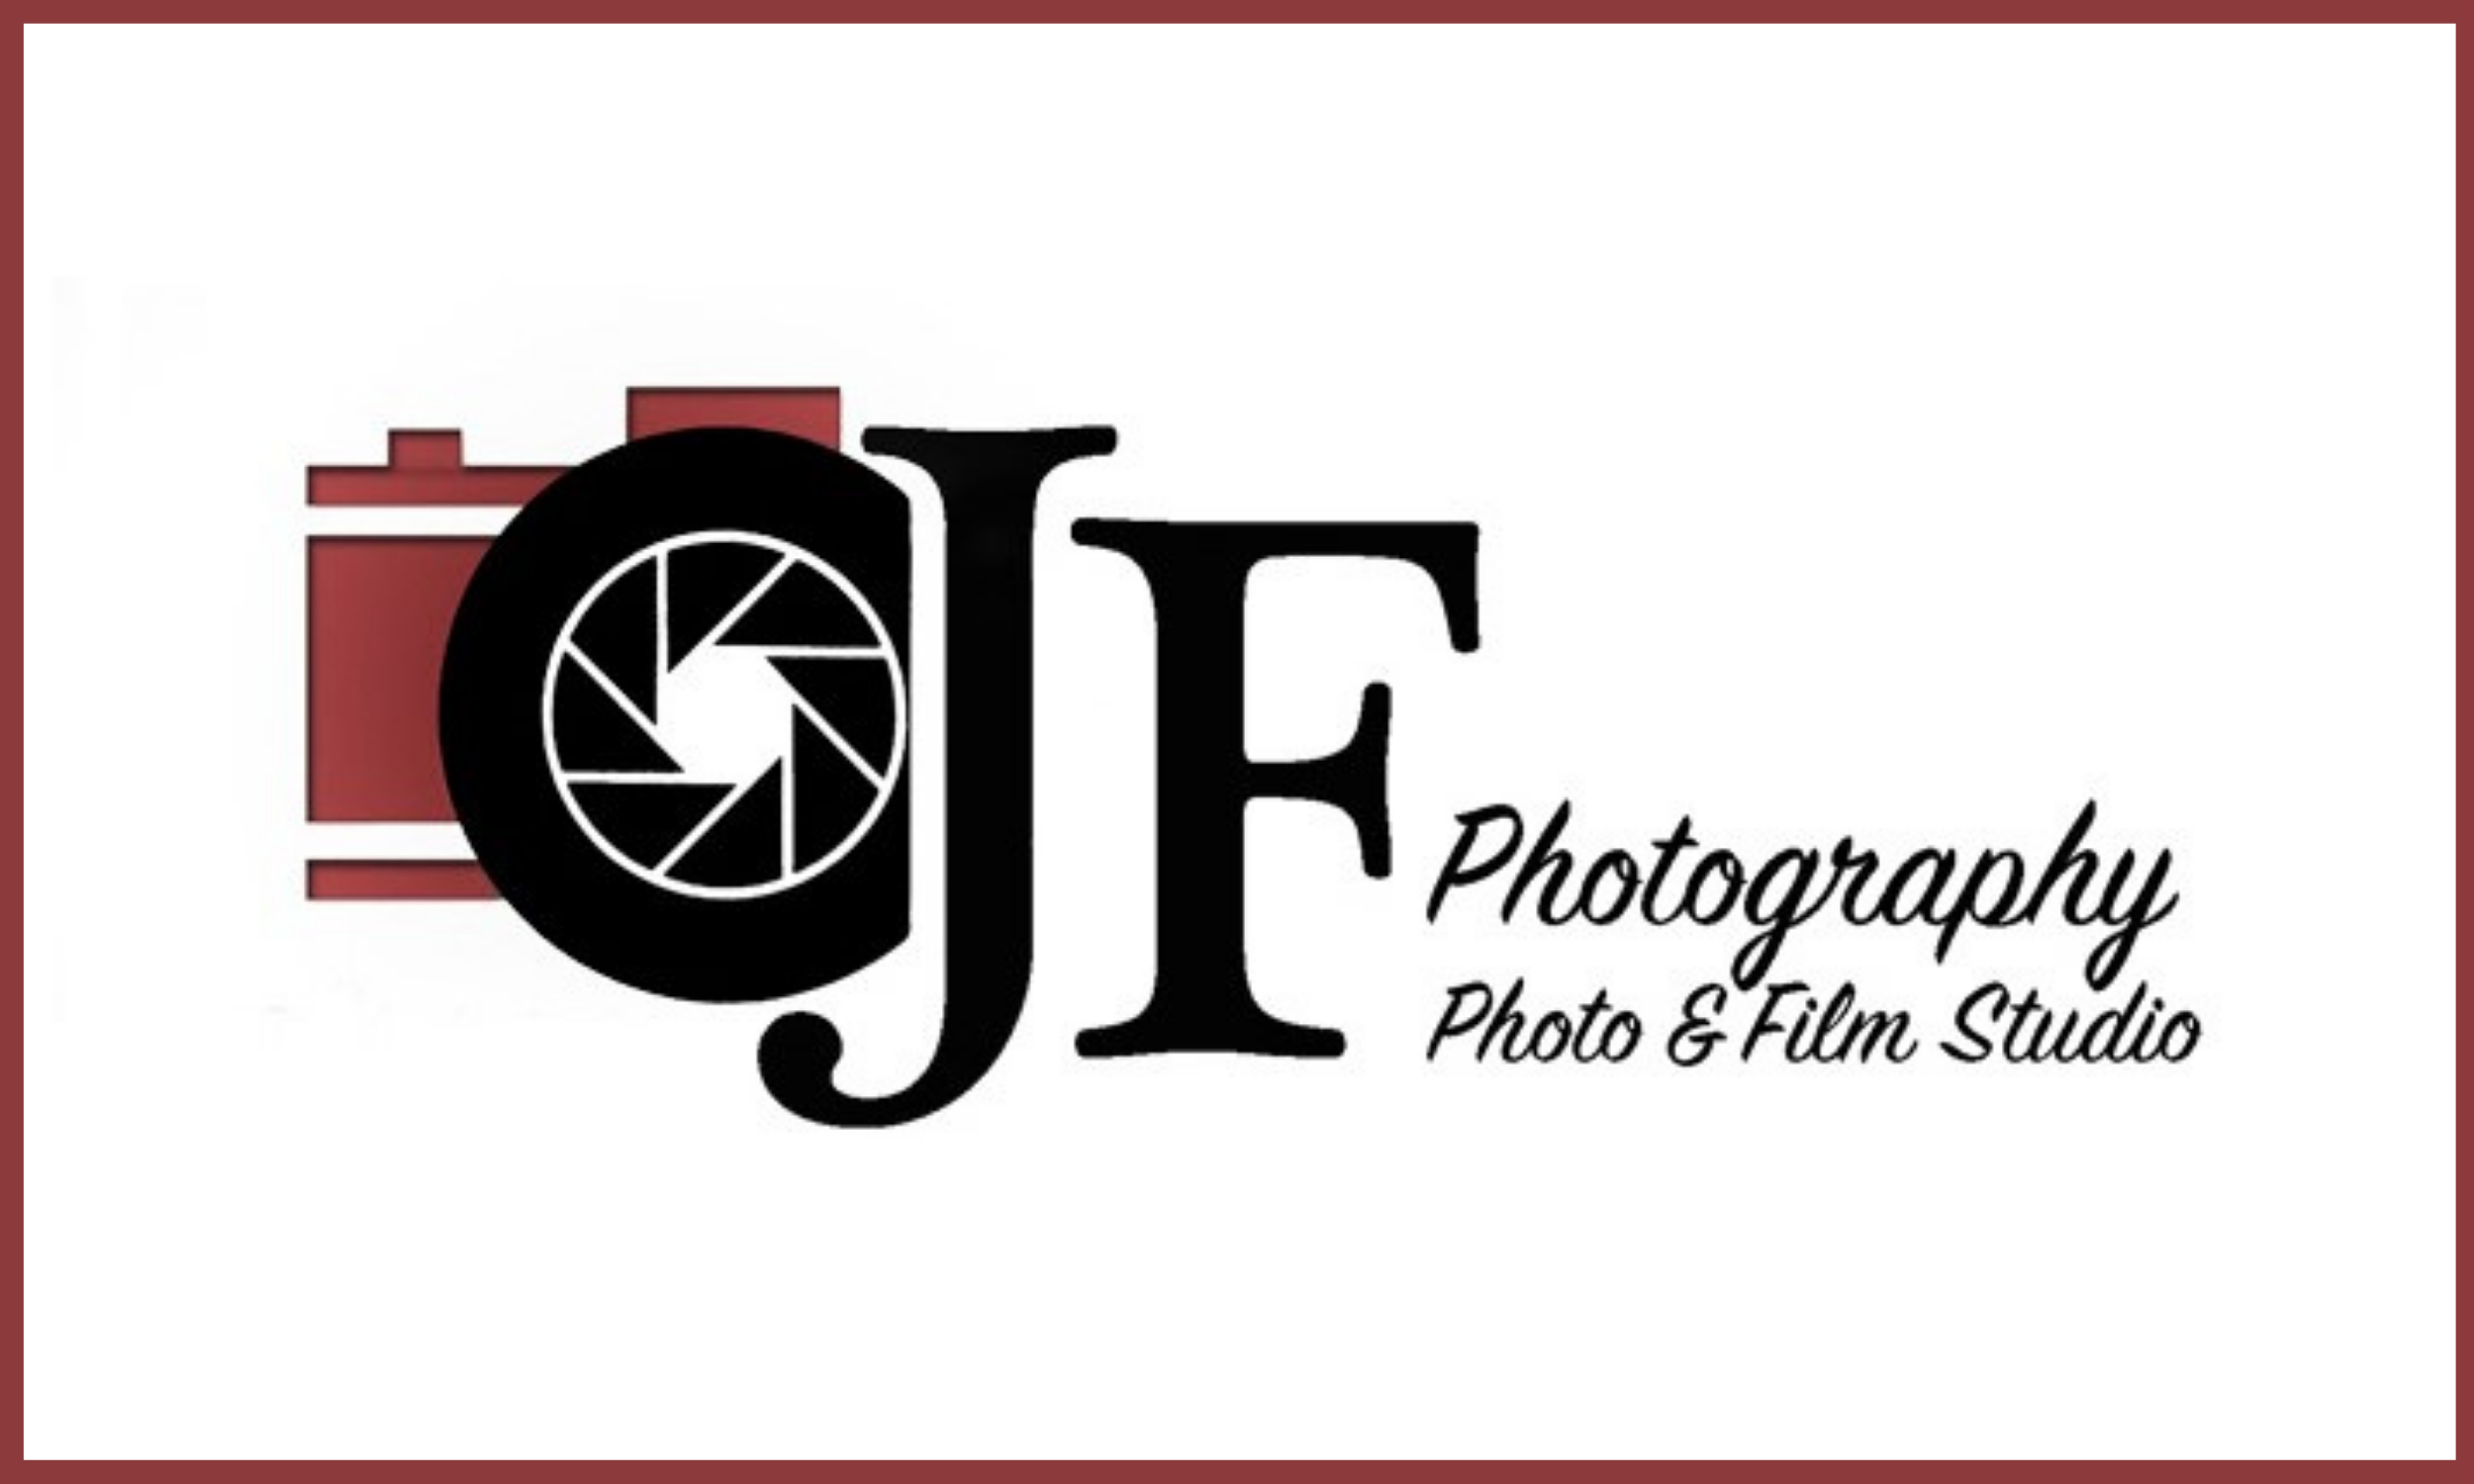 JF Photography